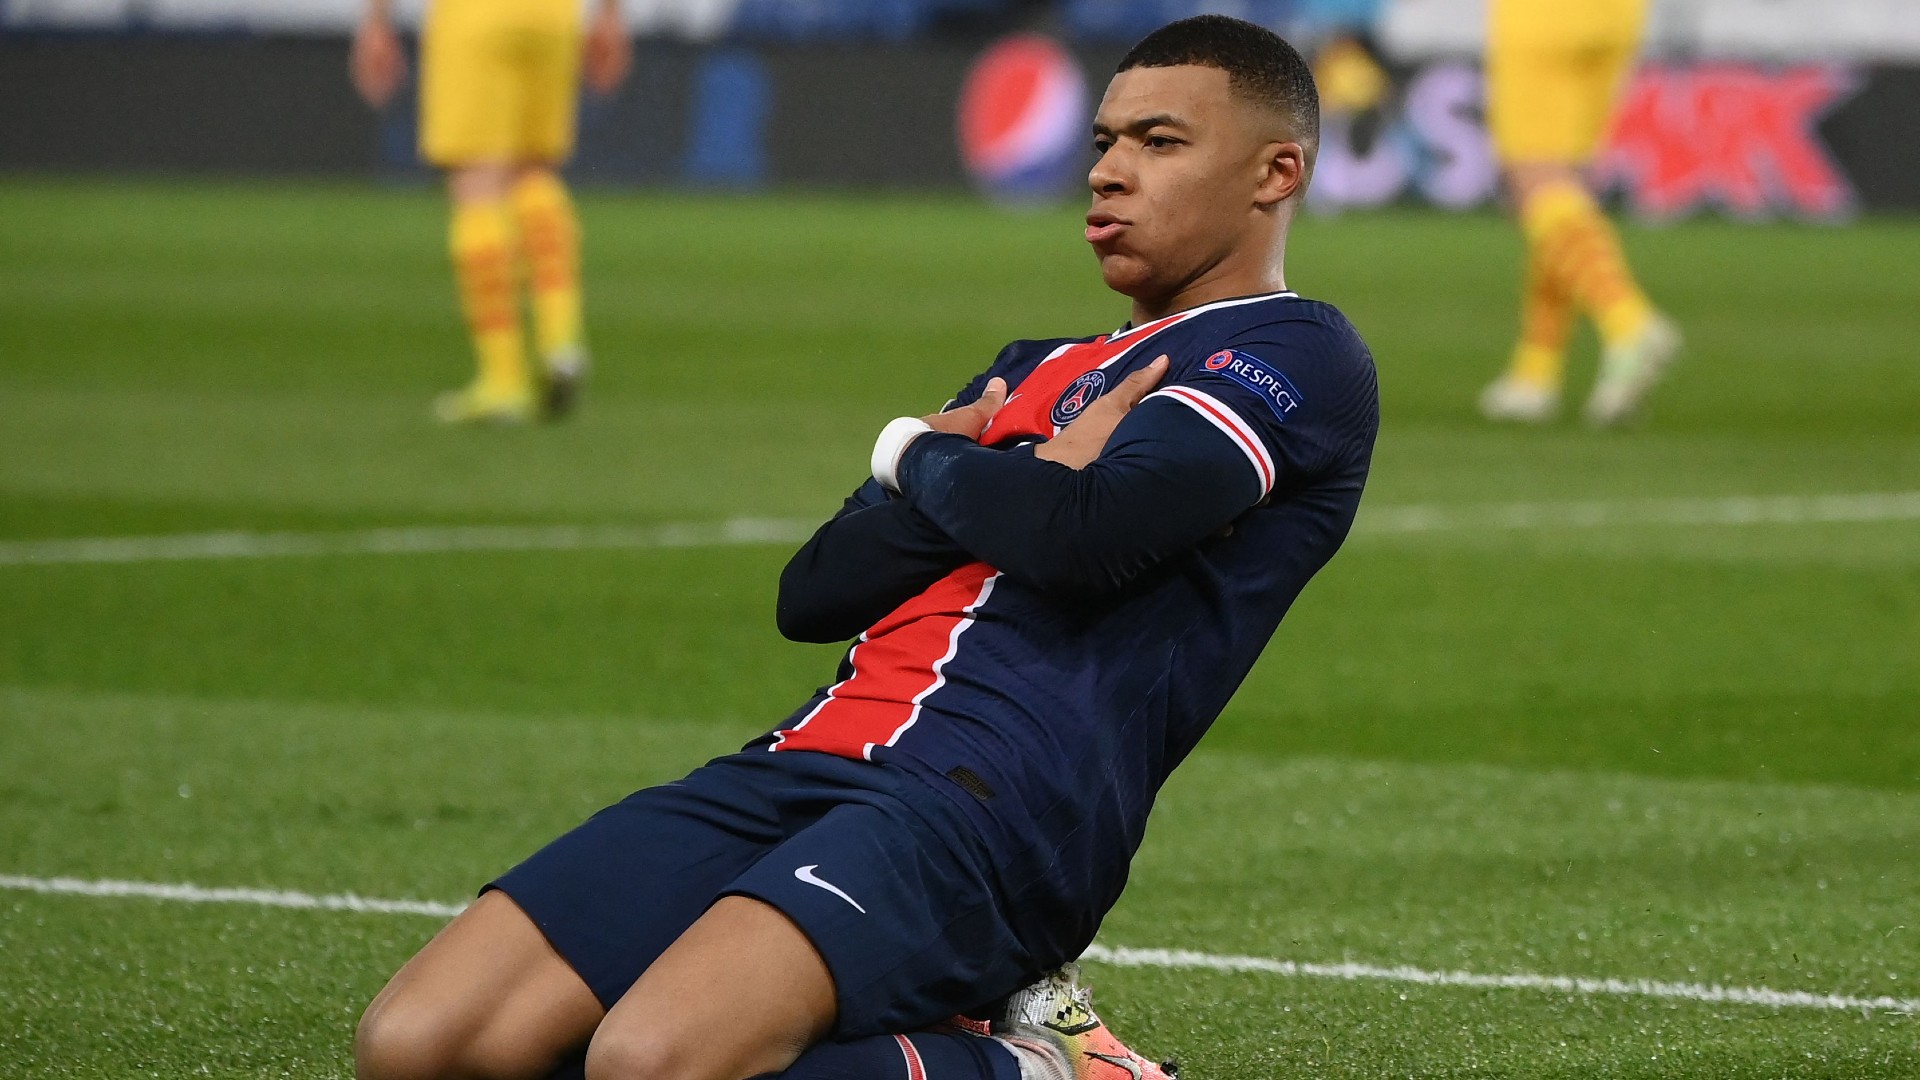 Kylian Mbappe will look to inspire PSG to victory against Nantes